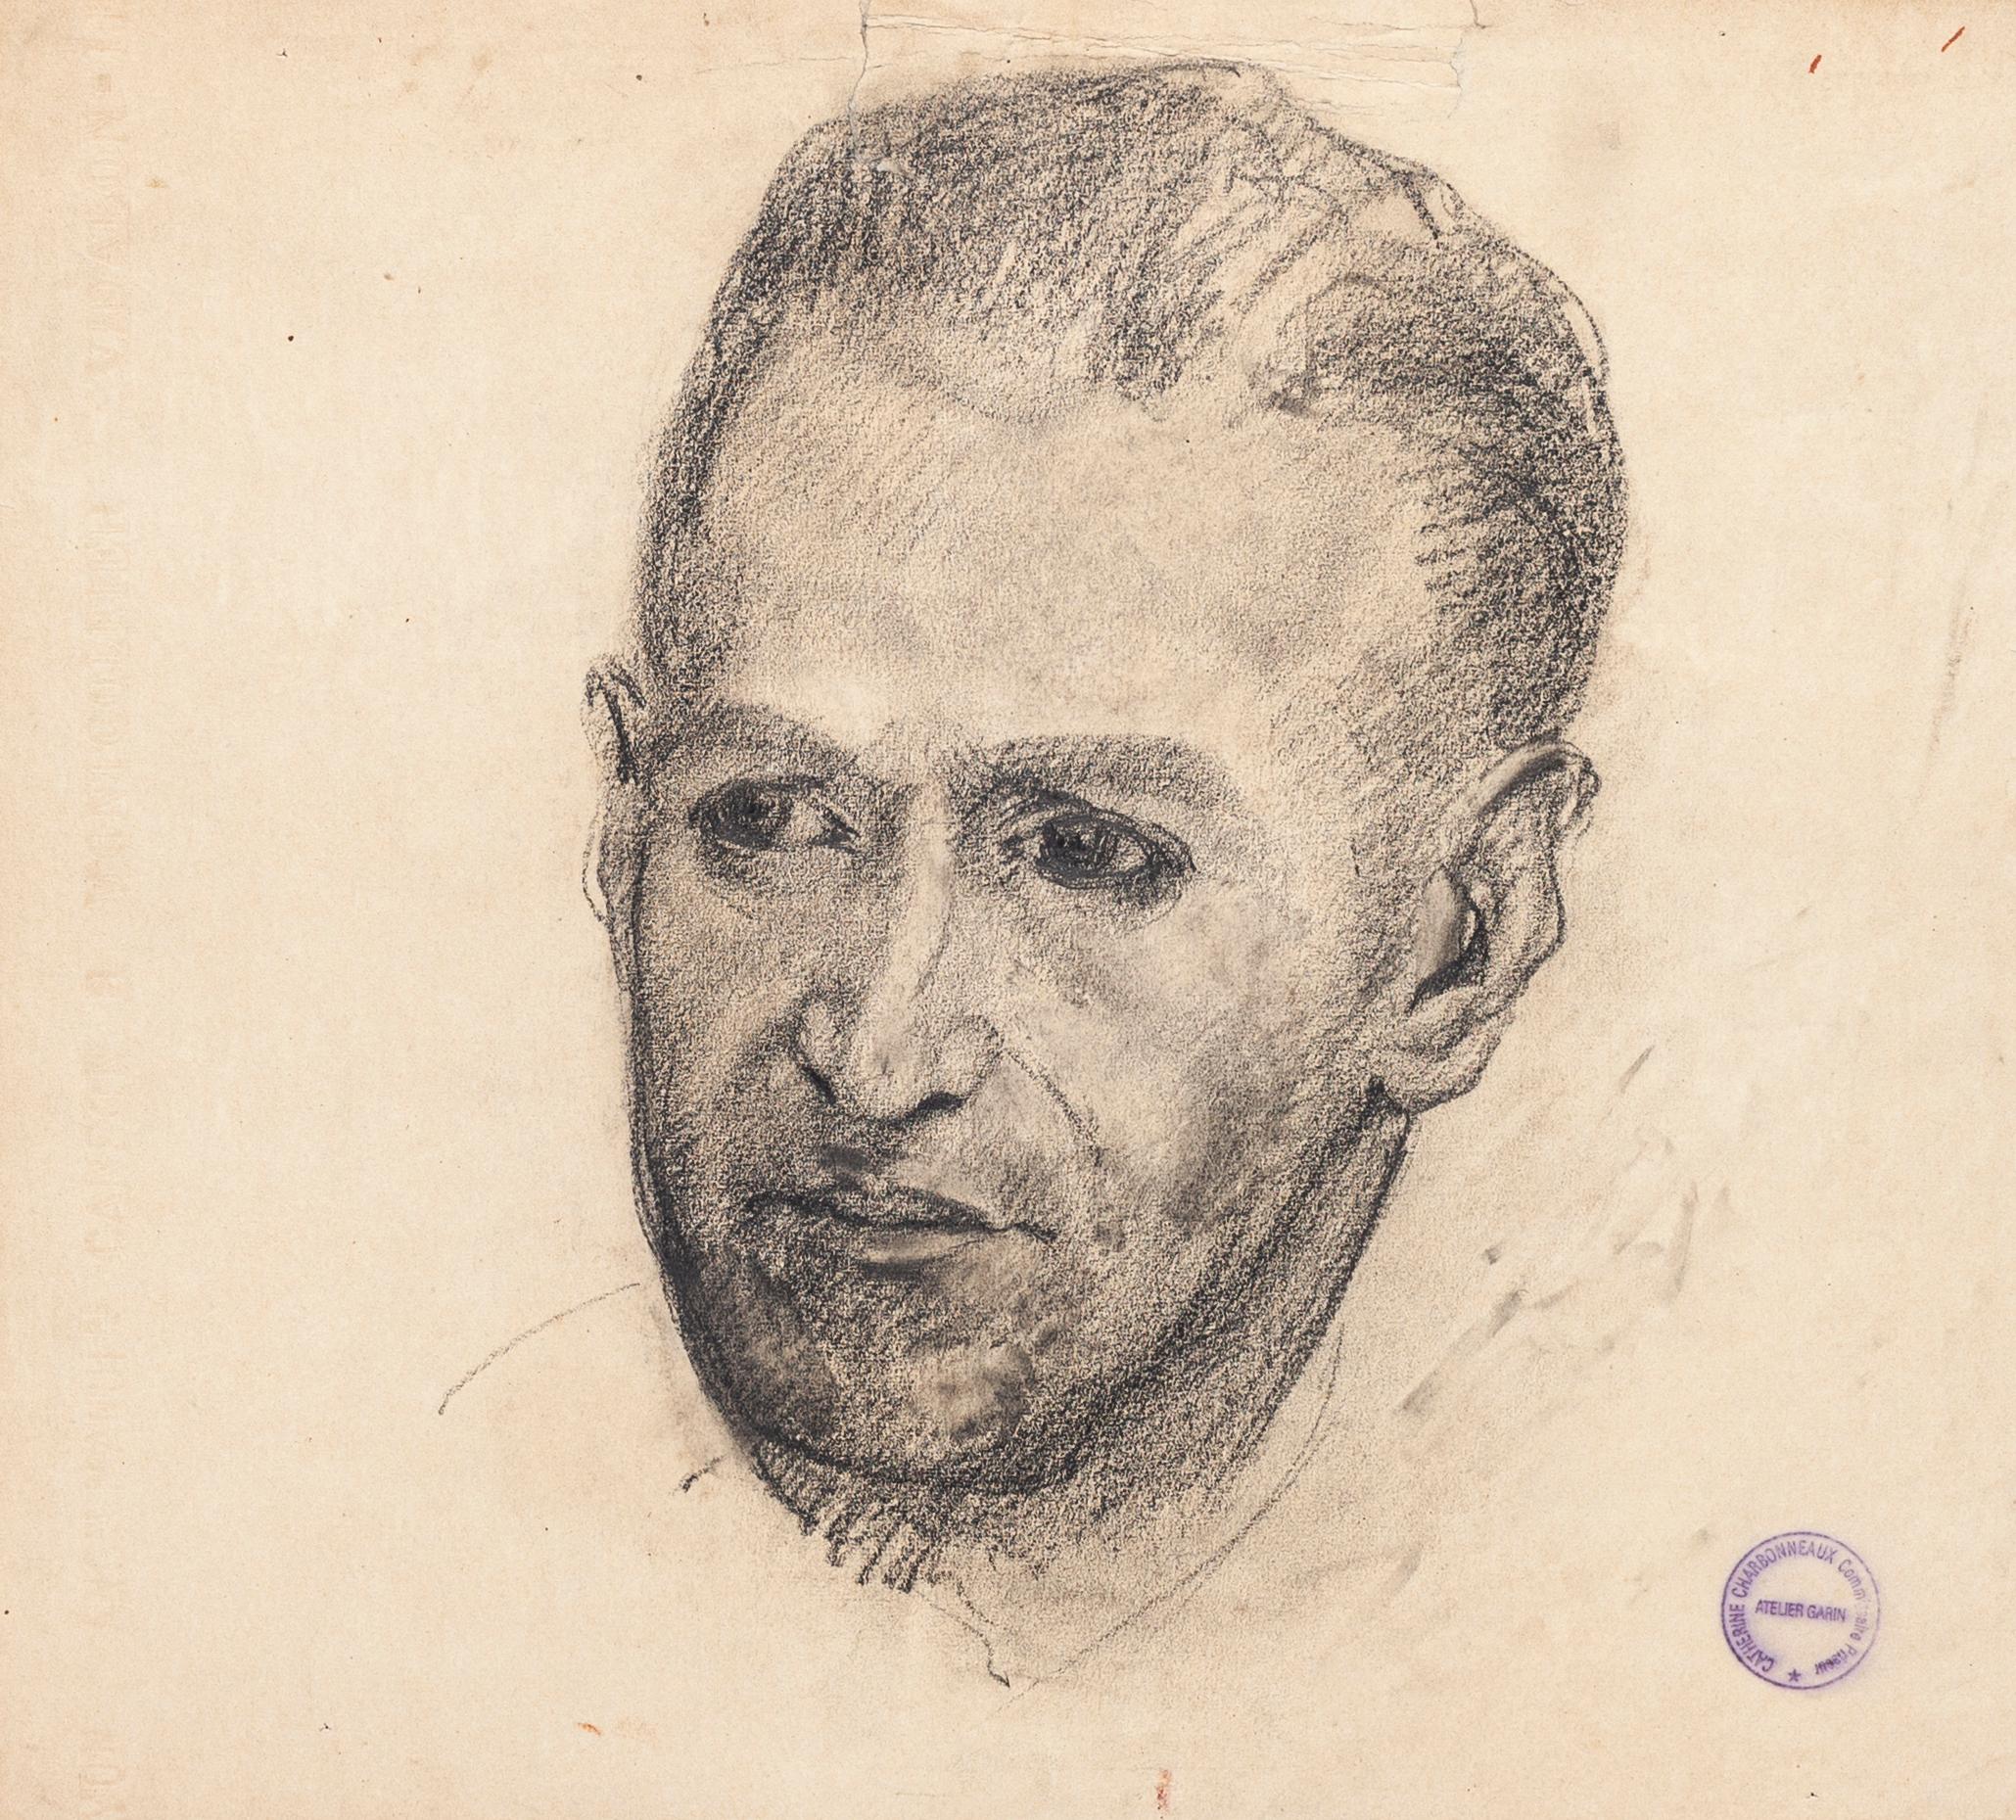 Male Portrait - Pencil and Charcoal Drawing on Paper by Paul Garin - 1950s